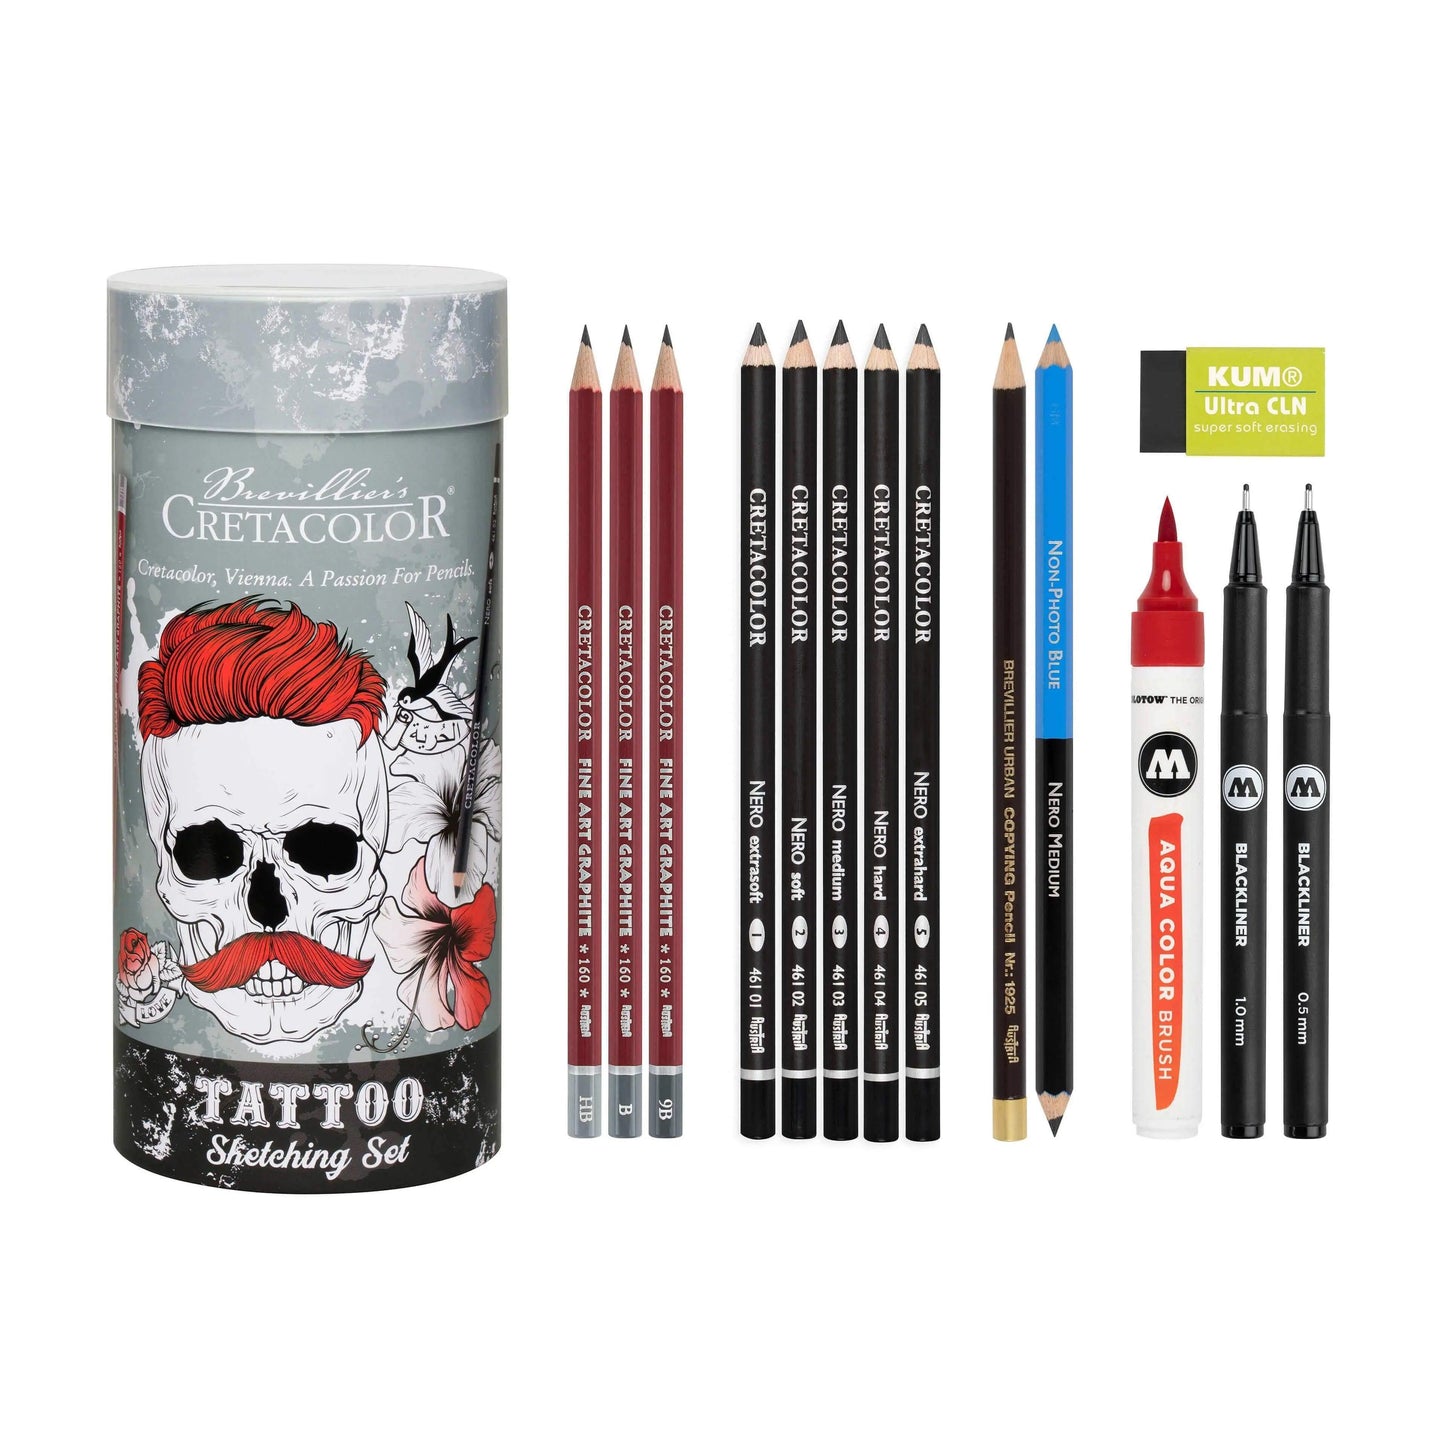 Cretacolor Tattoo Sketching Oval Tin Set Of 14 Pcs The Stationers